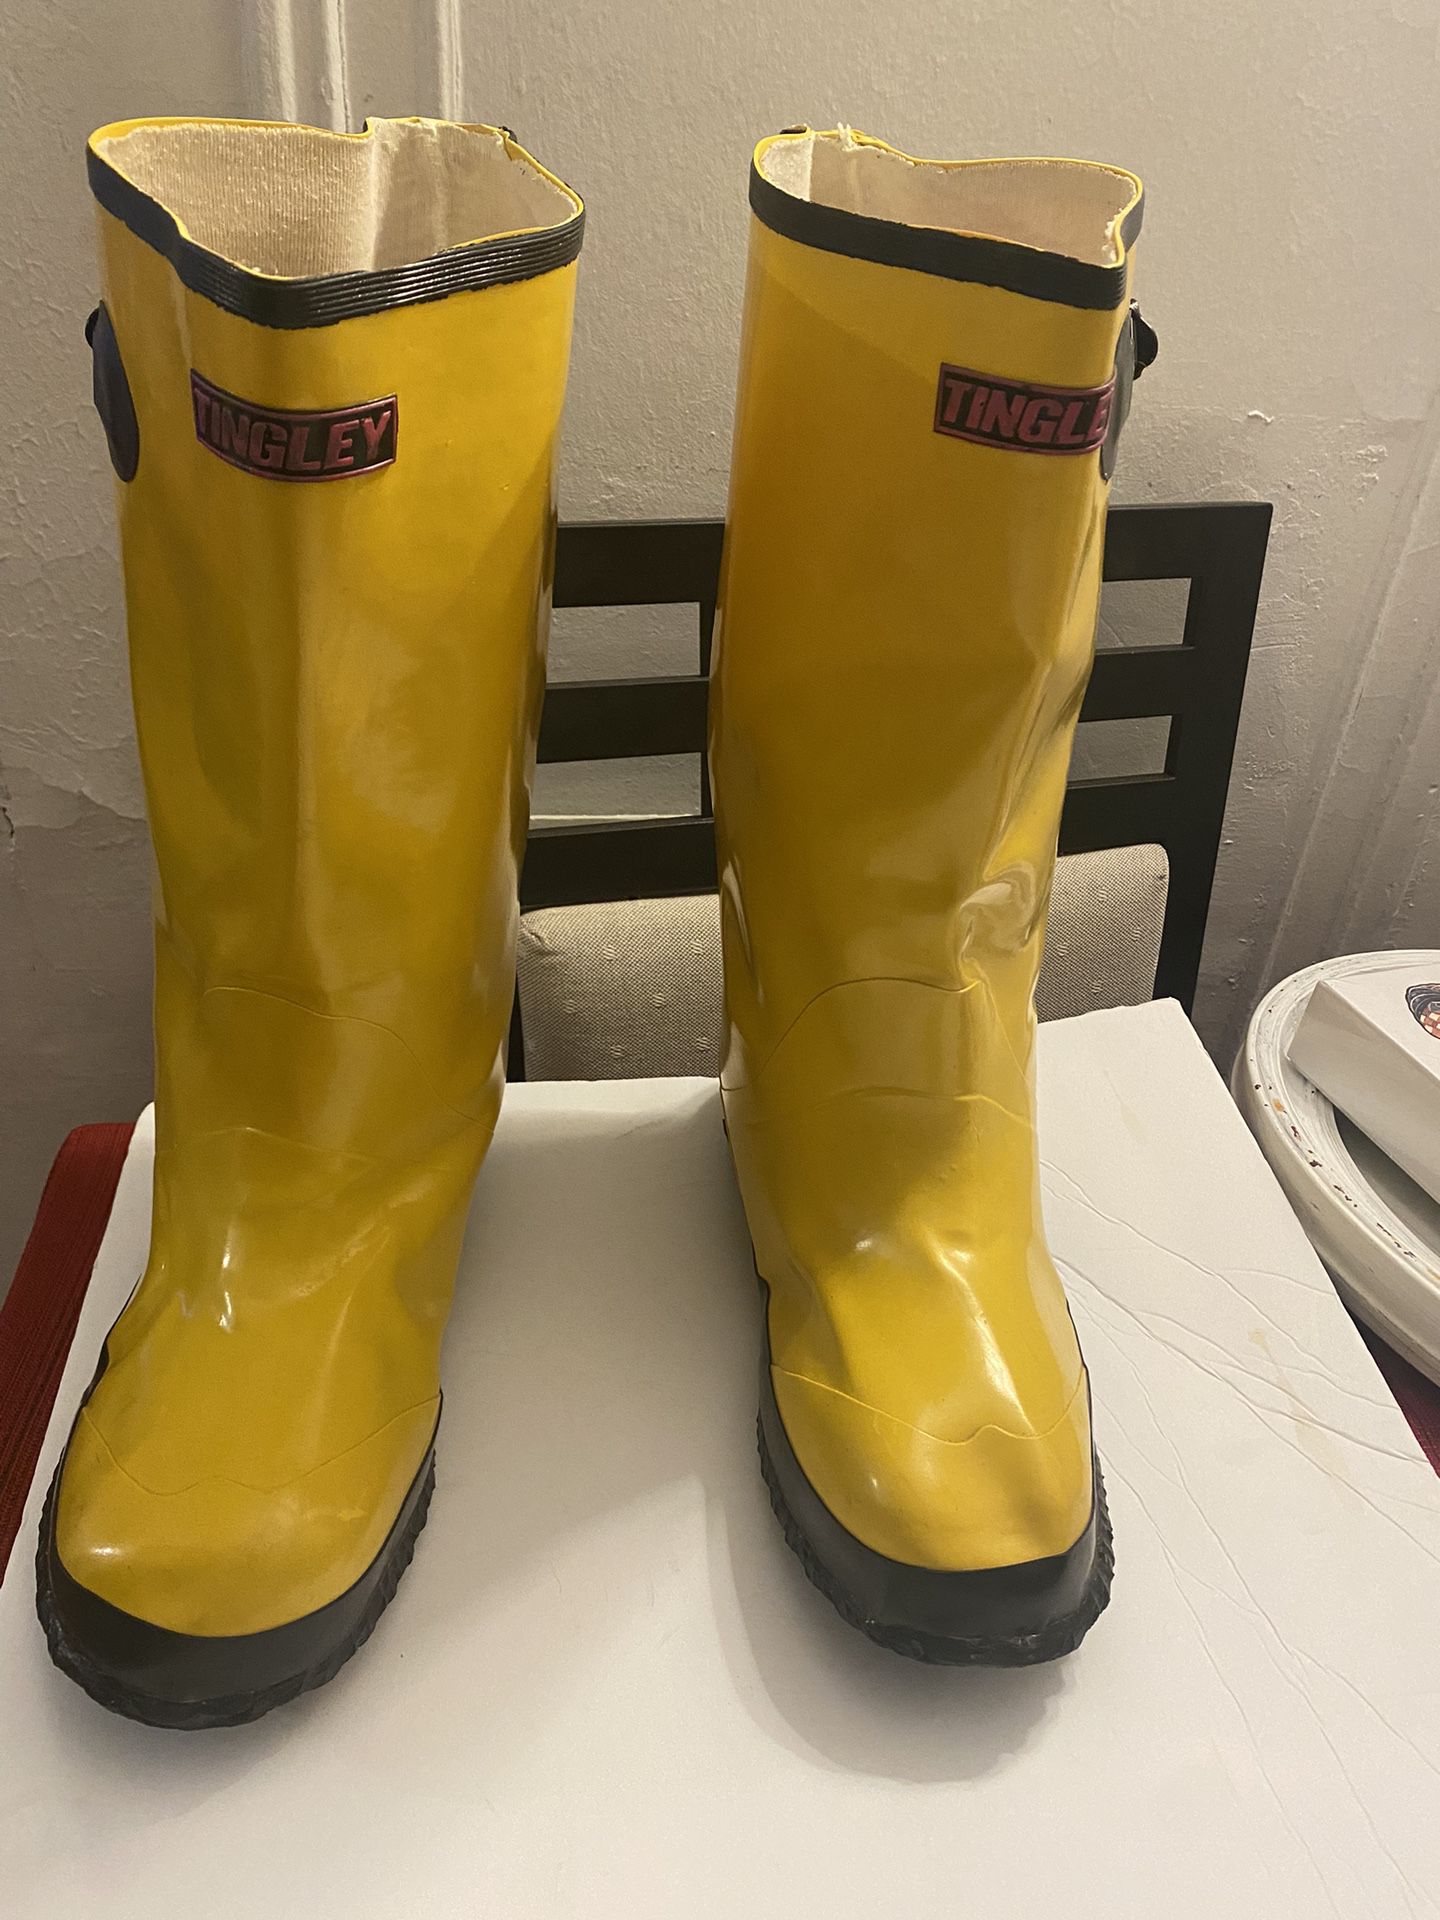 Tingley rubber boots Size 11 Boots ( Rain Boots That Go Over Your Size 11 Shoes)